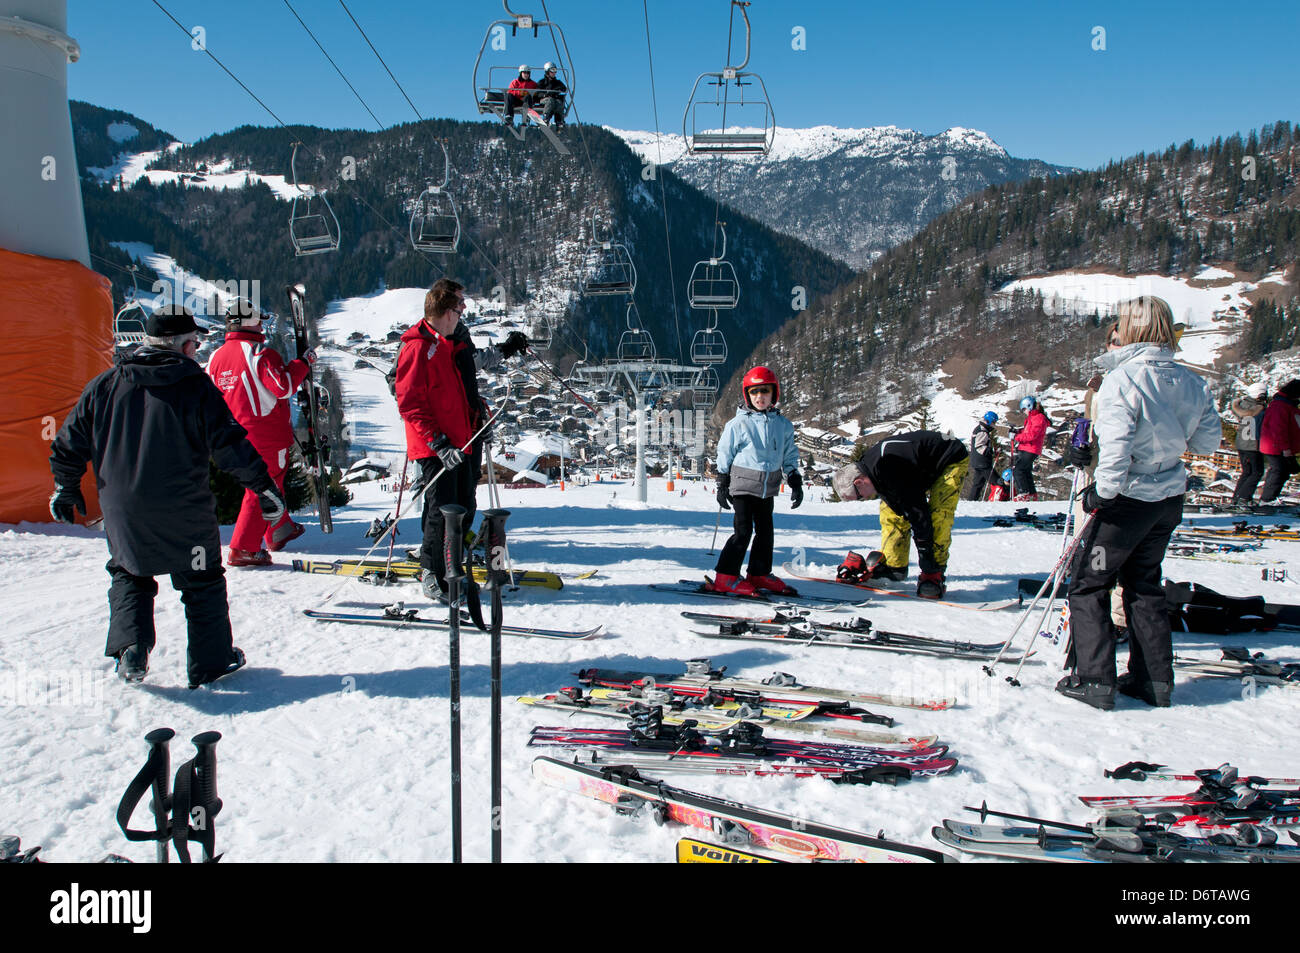 Families stop for lunch at a mountainside restaurant in La Clusaz resort in the French Alps Stock Photo